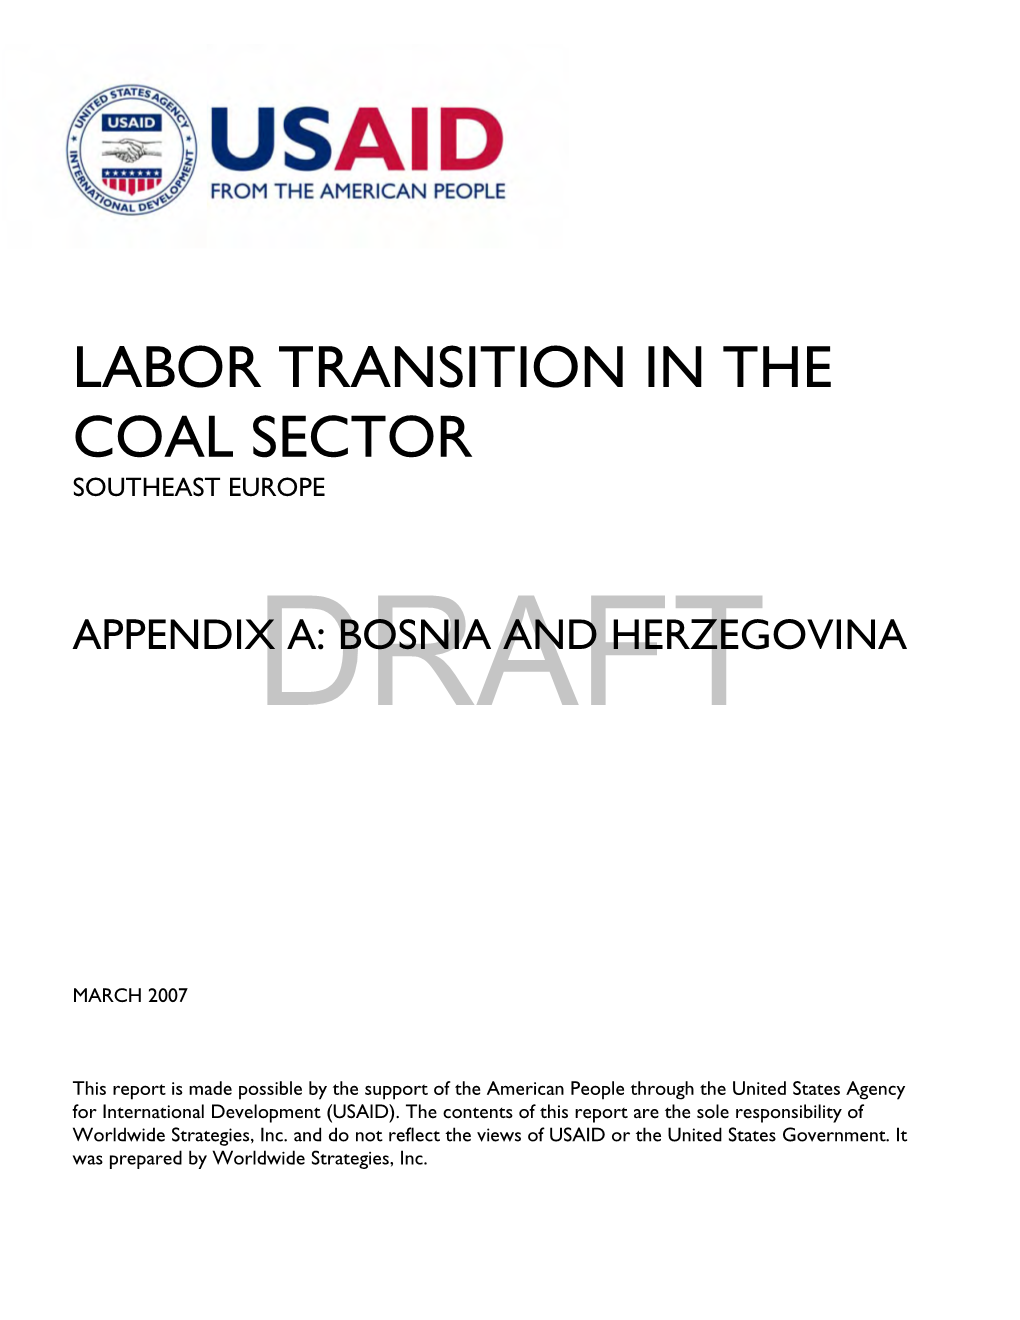 Labor Transition in the Coal Sector Southeast Europe